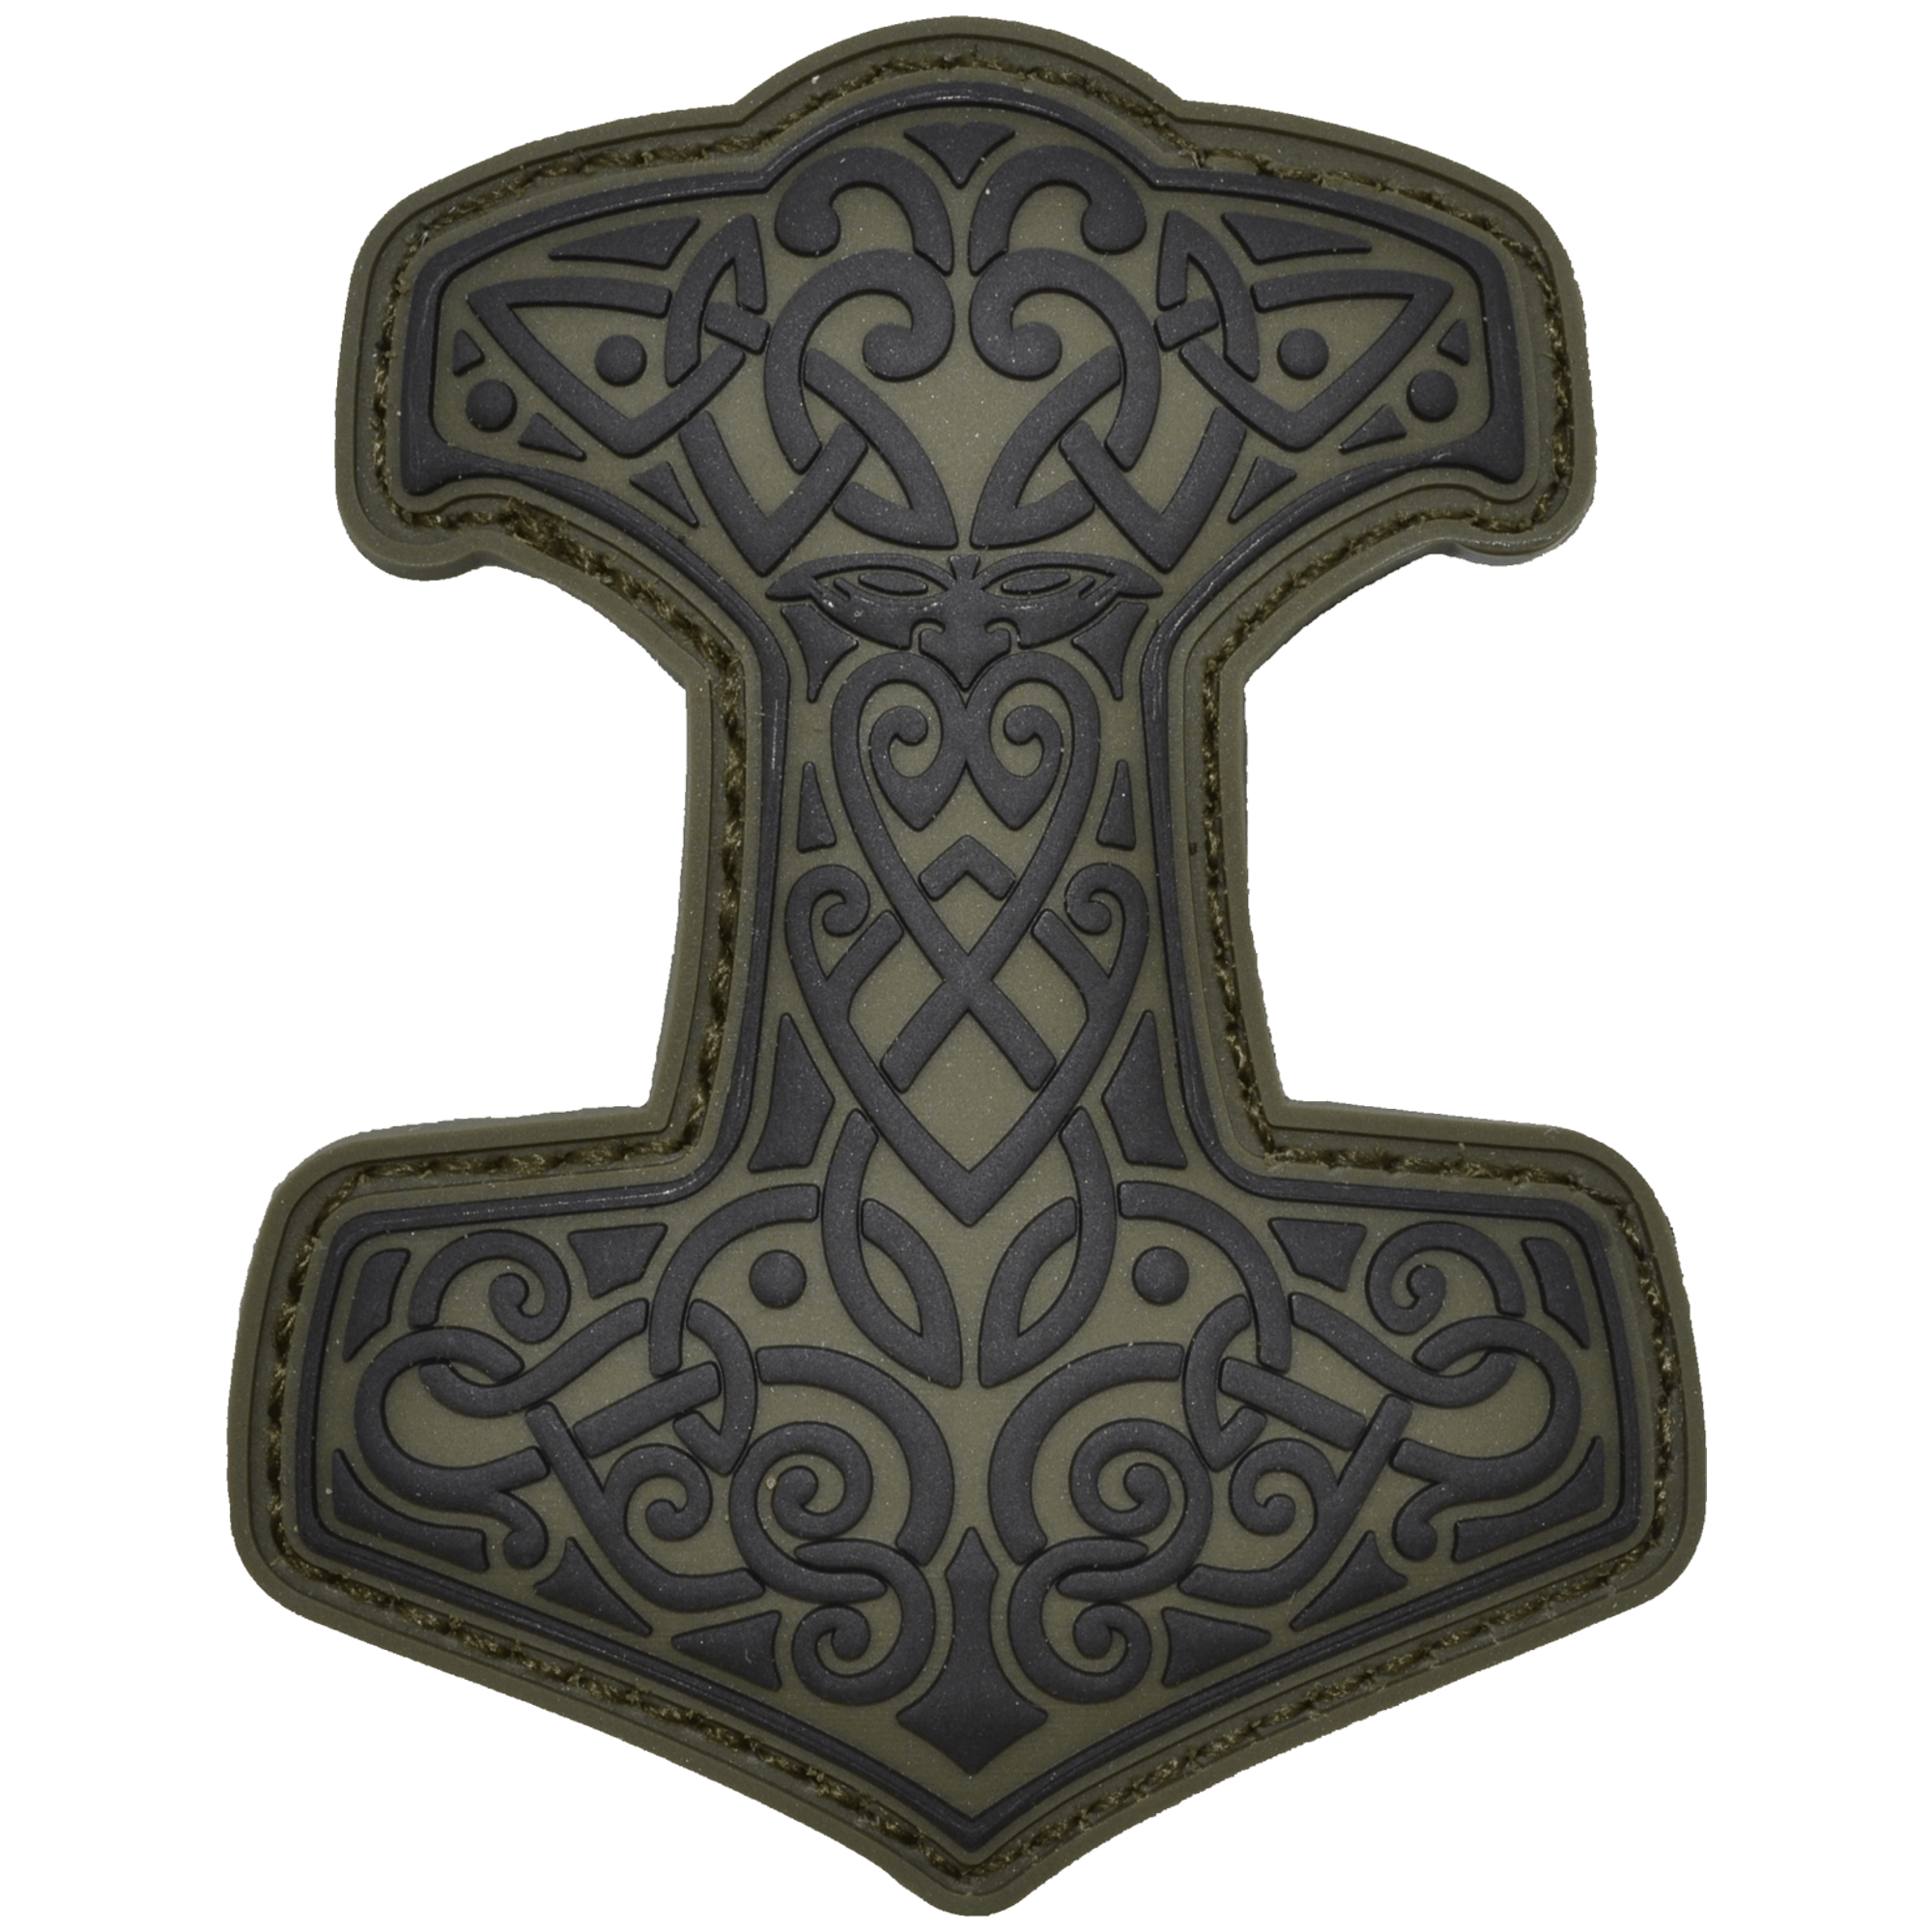 Tactical Gear Junkie Patches Olive Drab w/ Black Mjölnir Thor's Hammer Norse Viking - 2.5x3 PVC Patch - Multiple Colors